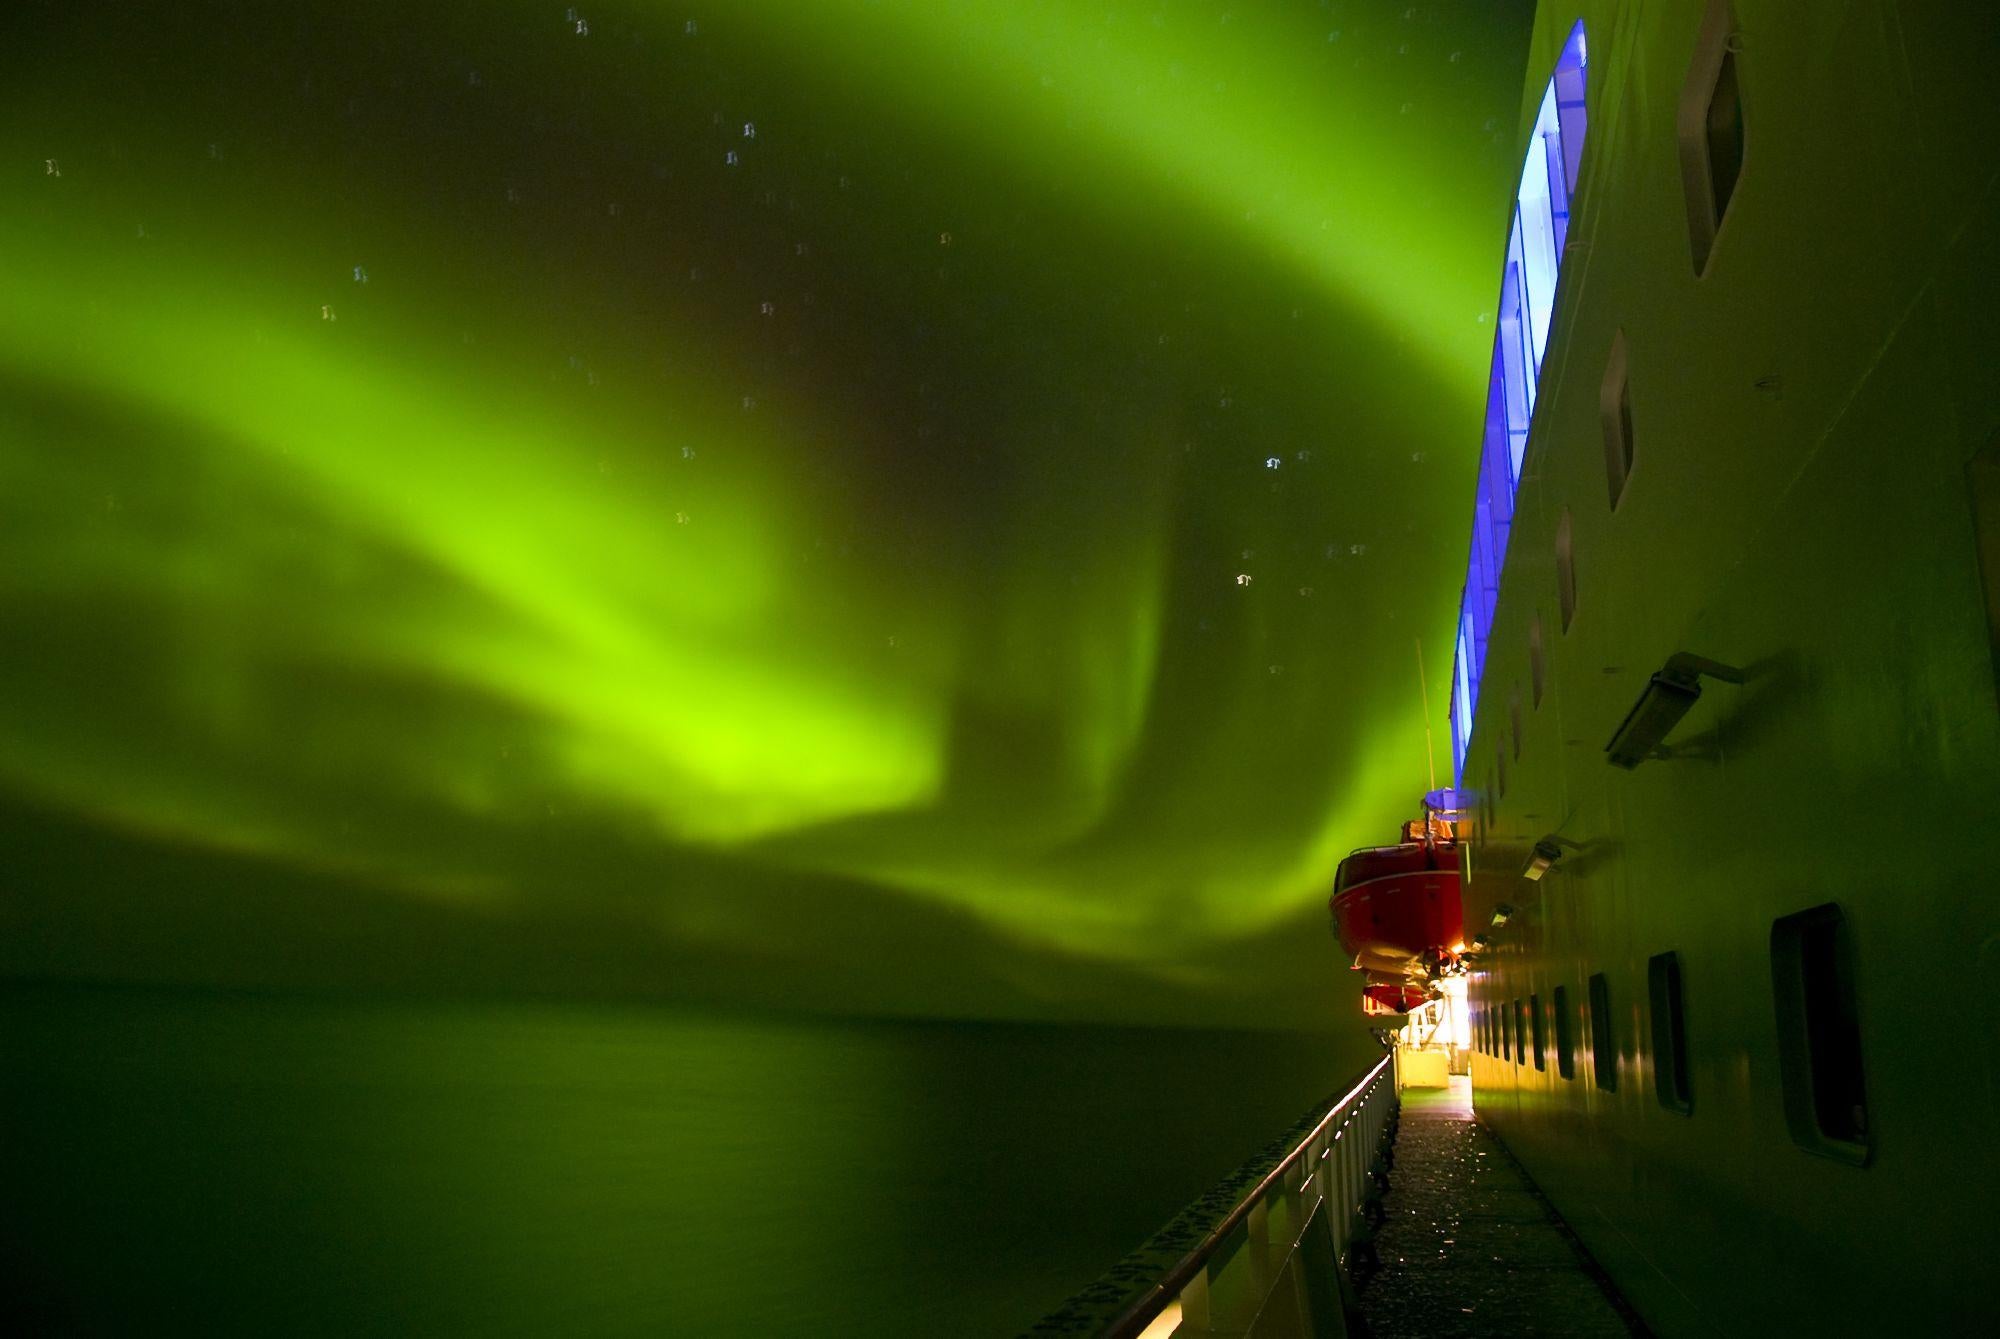 Hurtigruten staff will wake you up if the northern lights appear